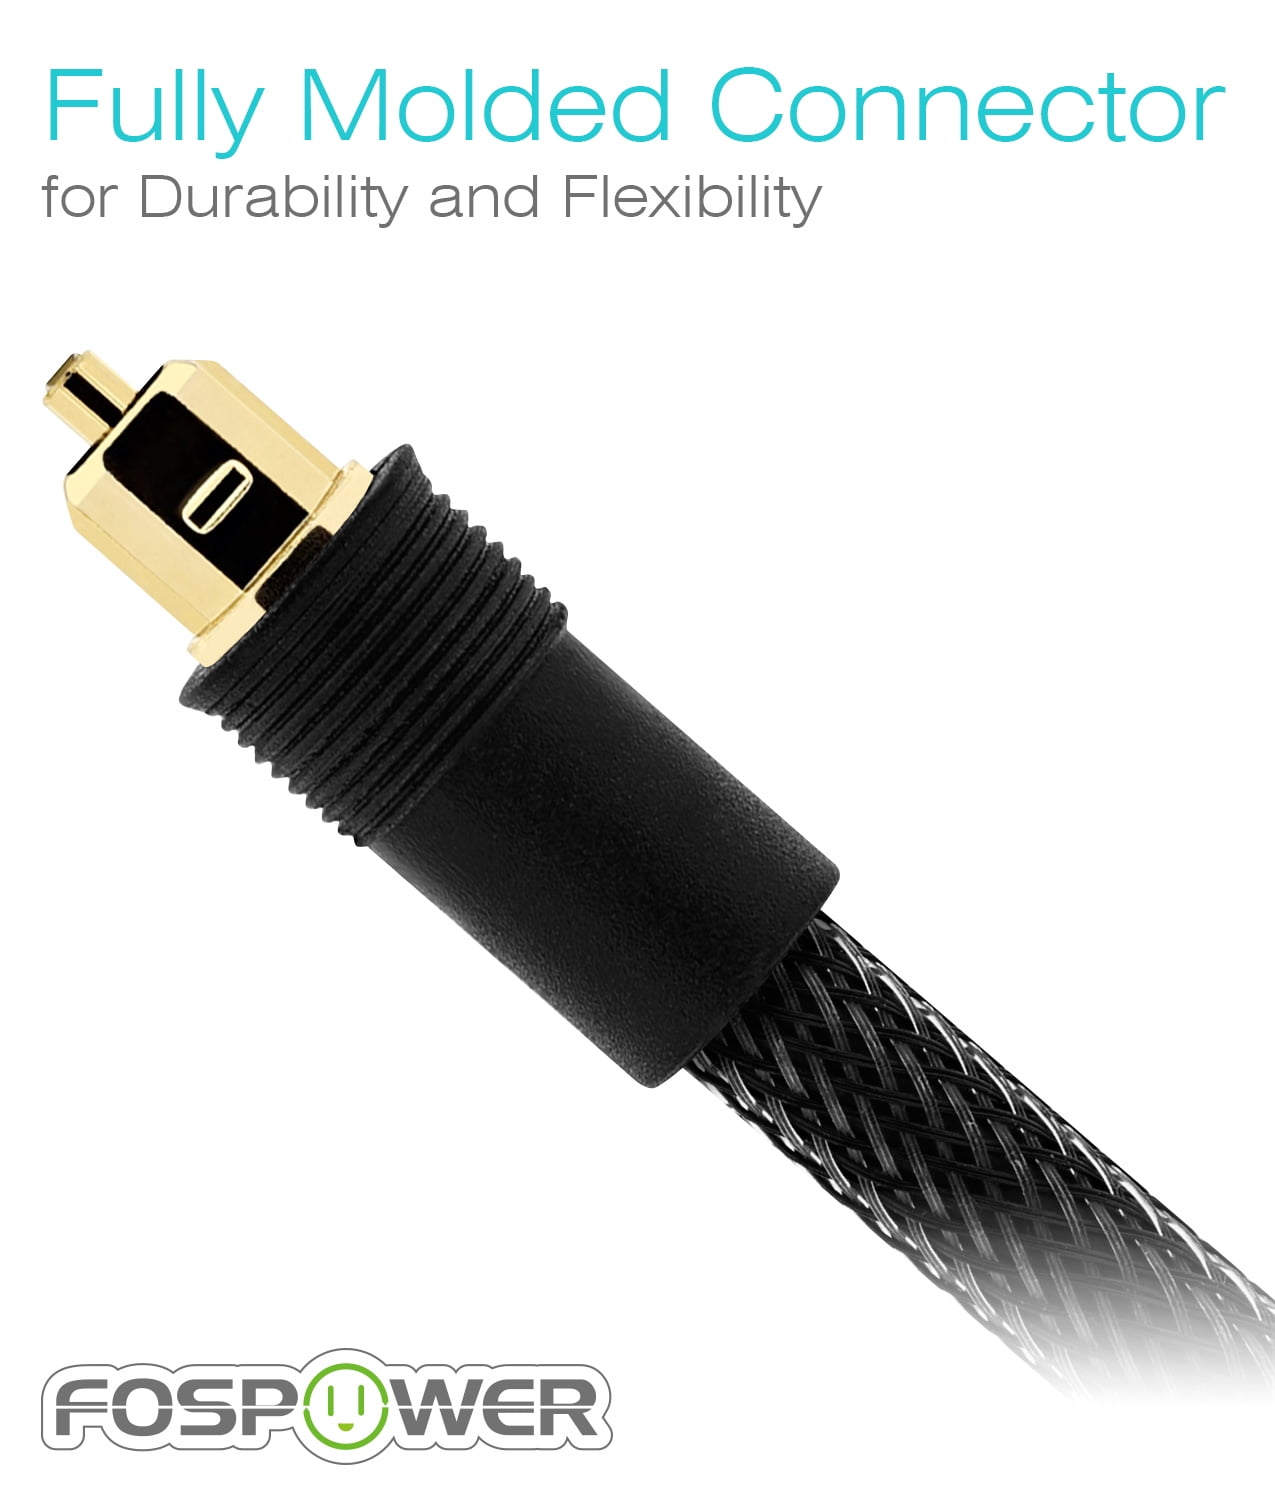 3 Feet 24K Gold Plated Toslink Digital Optical Audio Cable FosPower Metal Connectors & Ultra Durable Nylon Braided Jacket - S/PDIF Zero RFI & EMI Interference